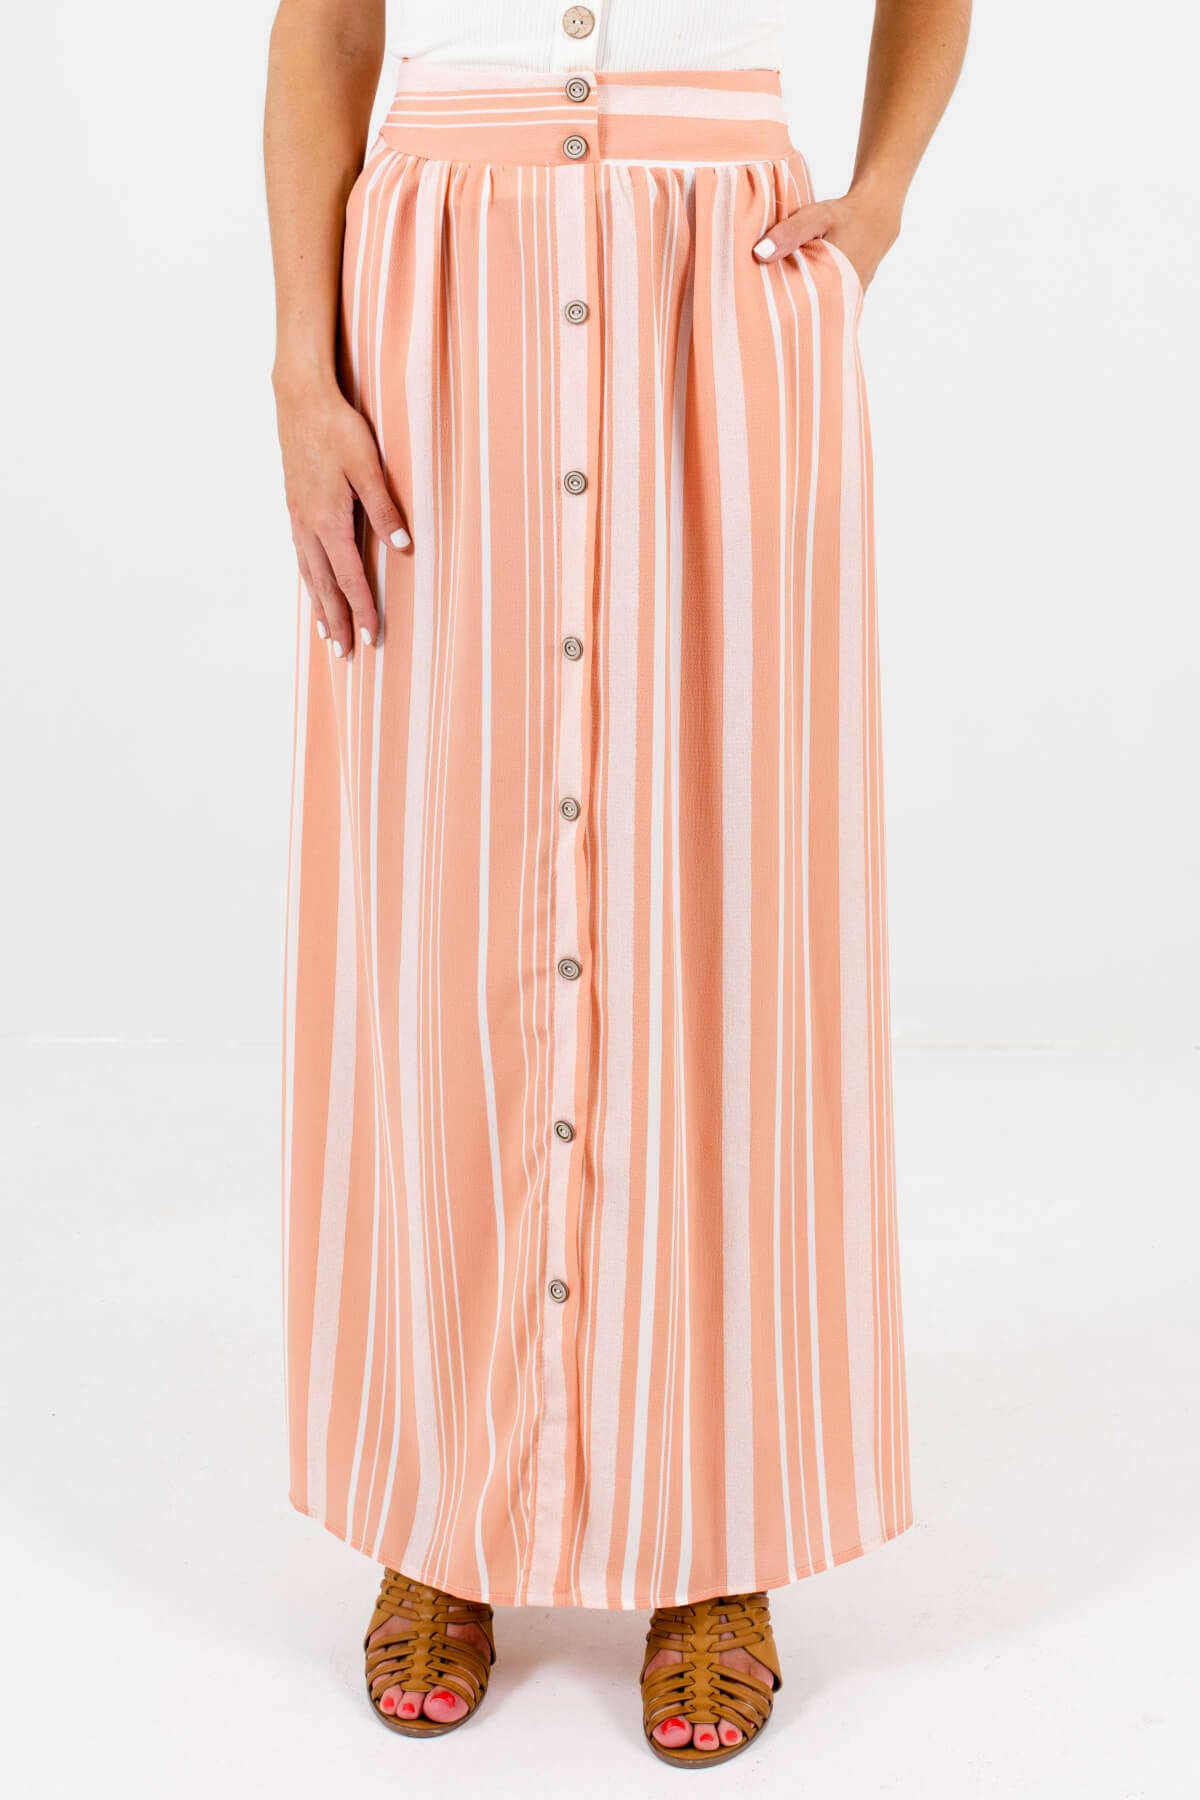 Peach Pink and White Striped Boutique Maxi Skirts for Women